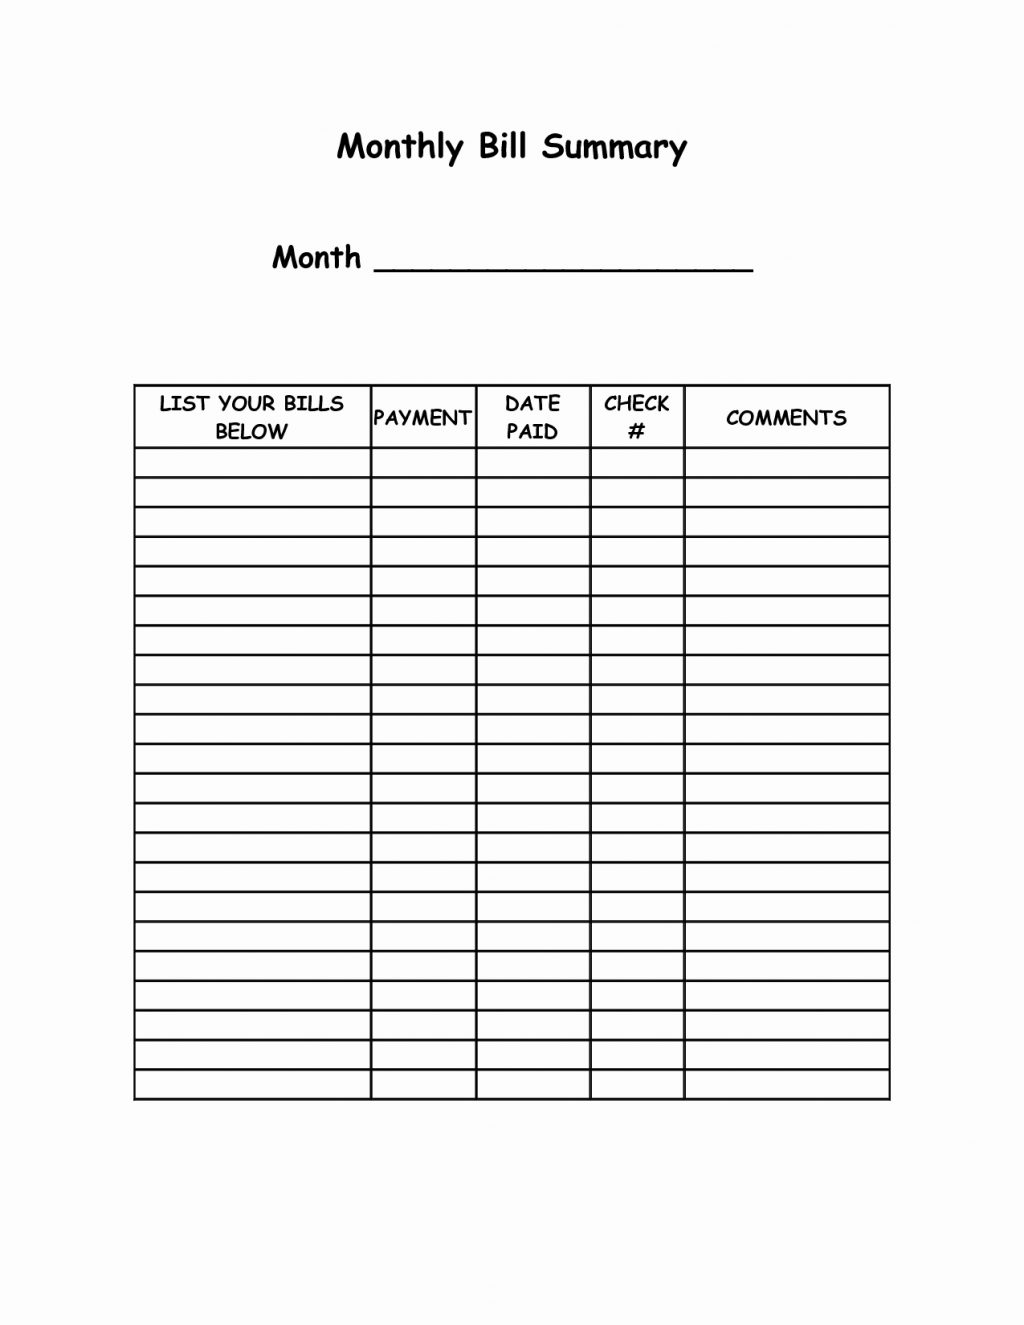 Free Bill Payment Spreadsheet Schedule Payoff Monthly | Pywrapper - Free Printable Monthly Bill Payment Worksheet